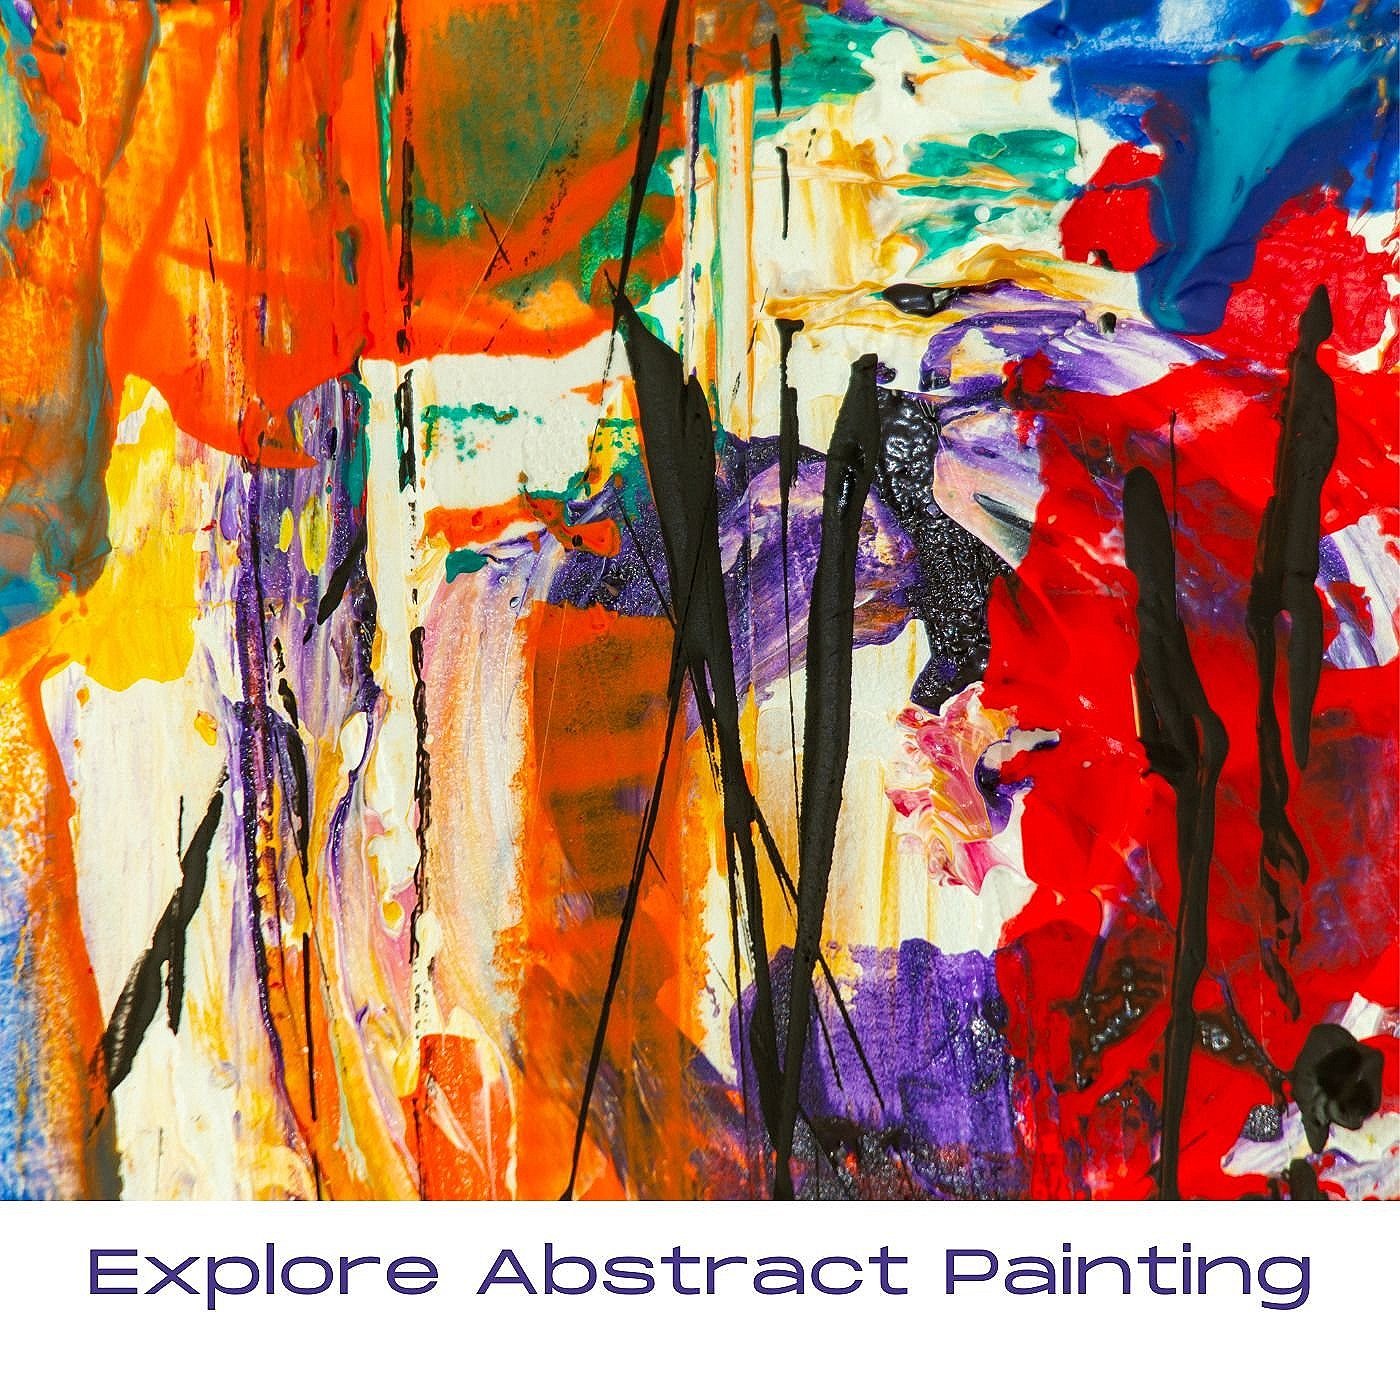 Explore+Abstract+Painting.jpg